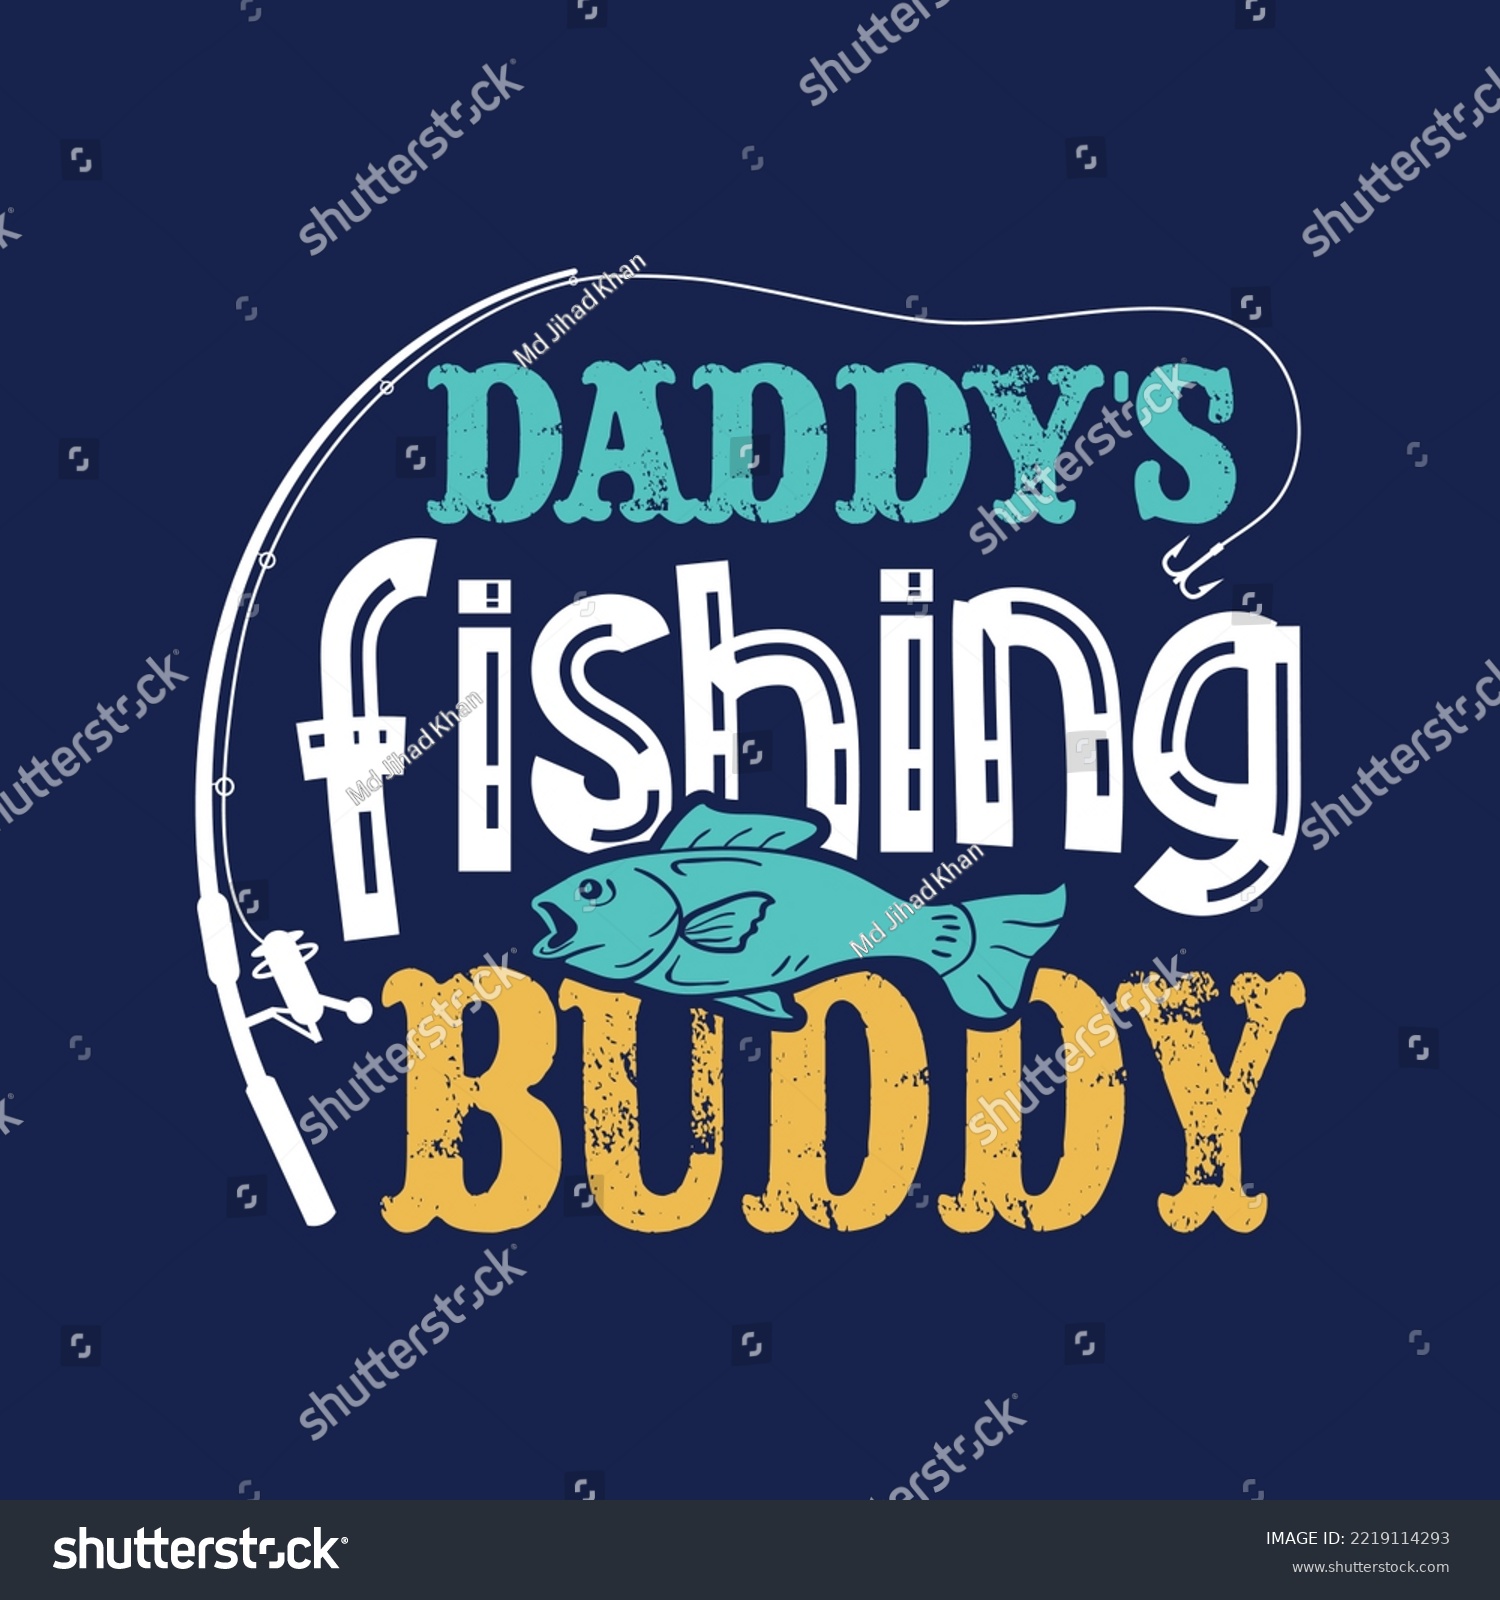 SVG of Daddy's Fishing Buddy. Fishing T-Shirt Gift Men's Funny Fishing t shirts design, Vector graphic, typographic poster or t-shirt svg